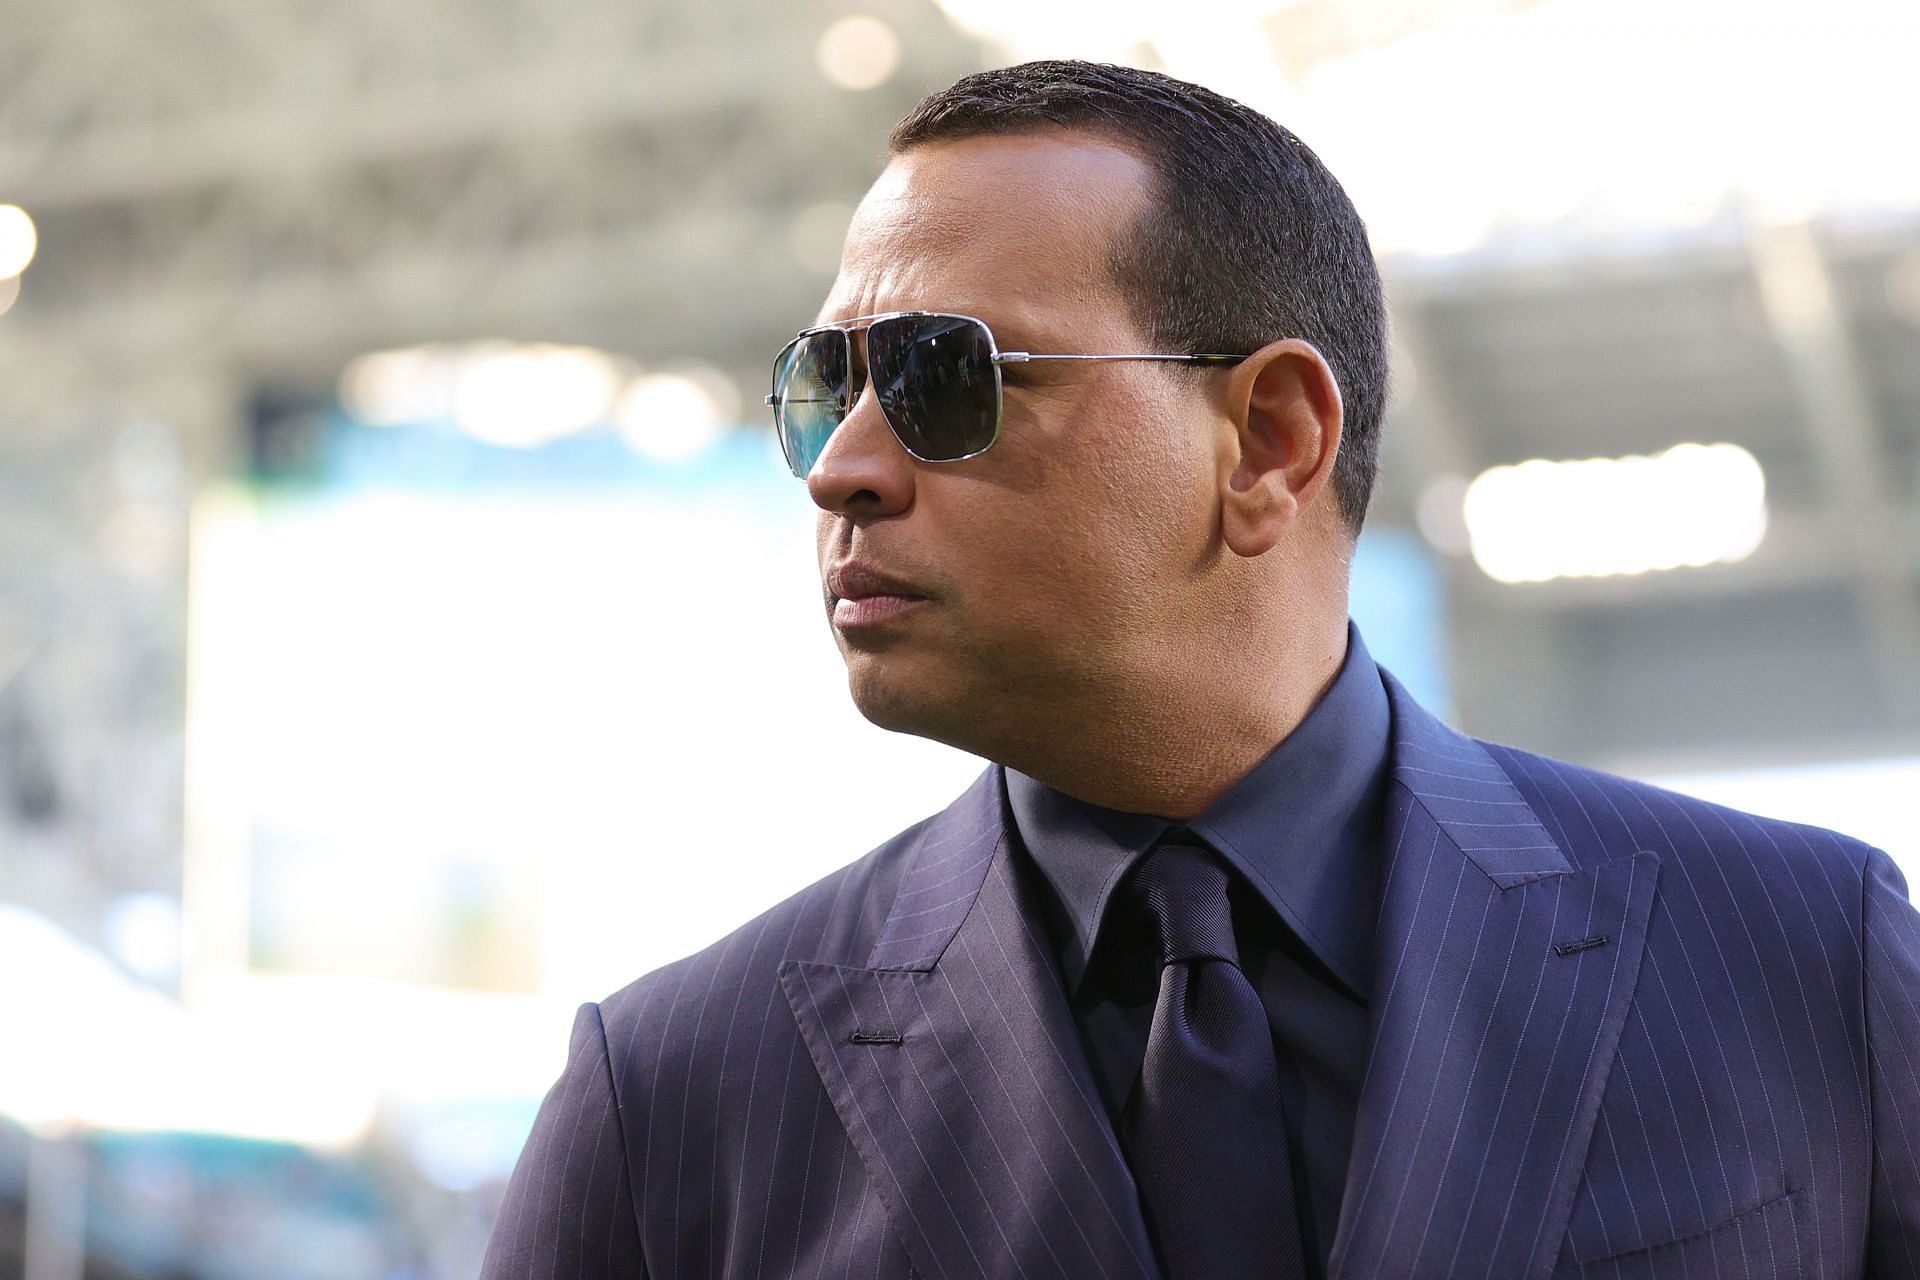 Alex Rodriguez at last year&#039;s Superbowl. Since his retirement, the former star has appeared frequently for media outlets